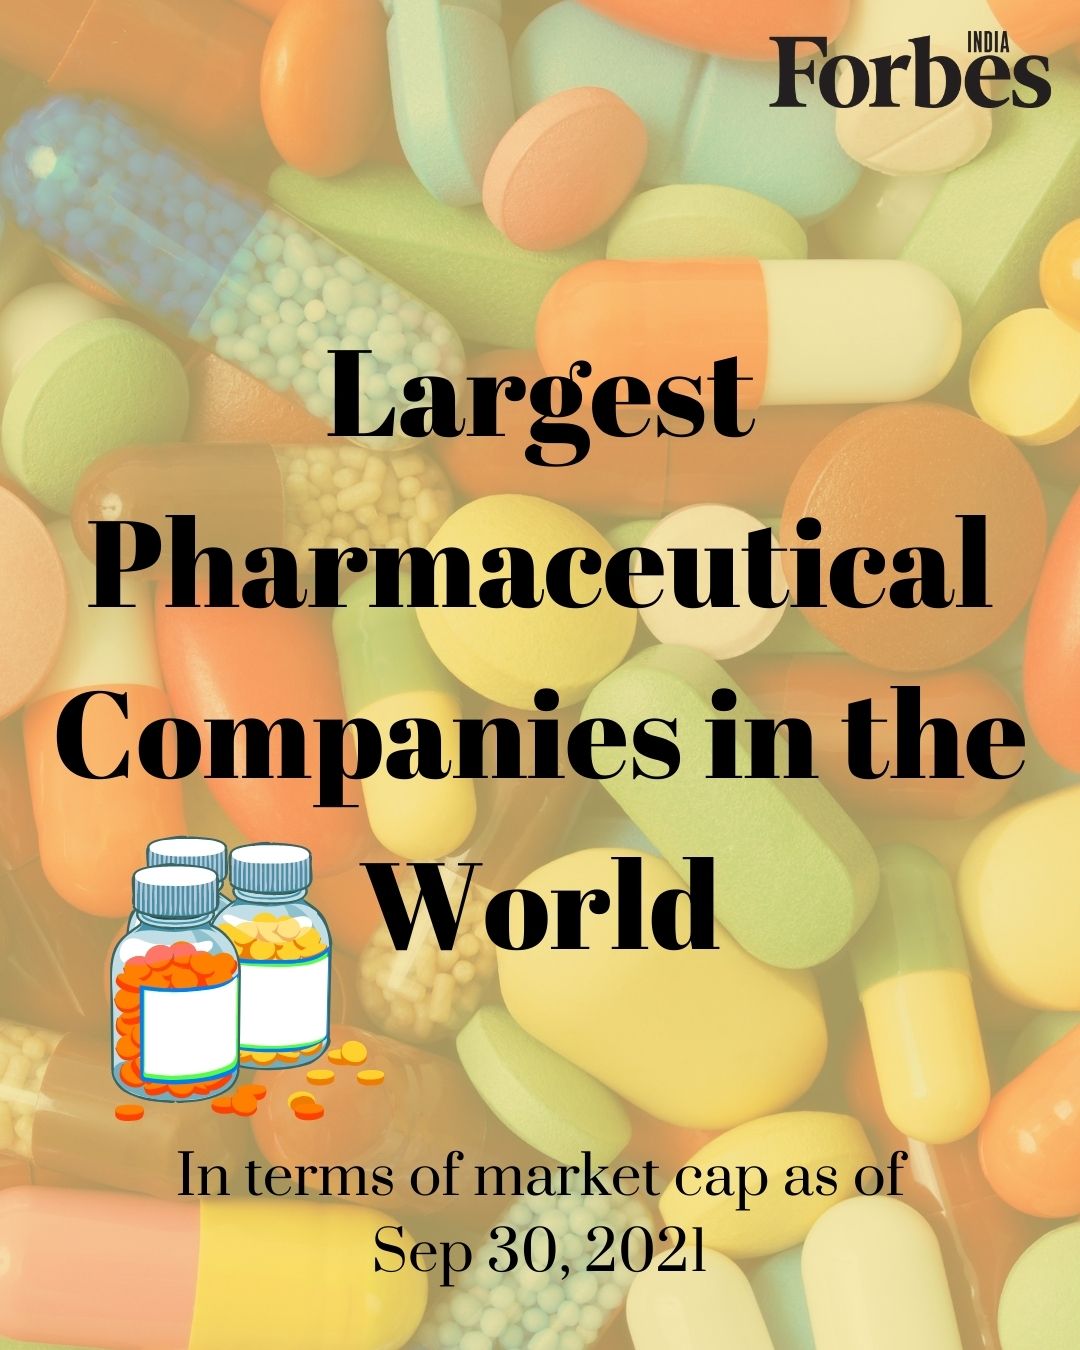 These are the top 10 pharma companies in the world